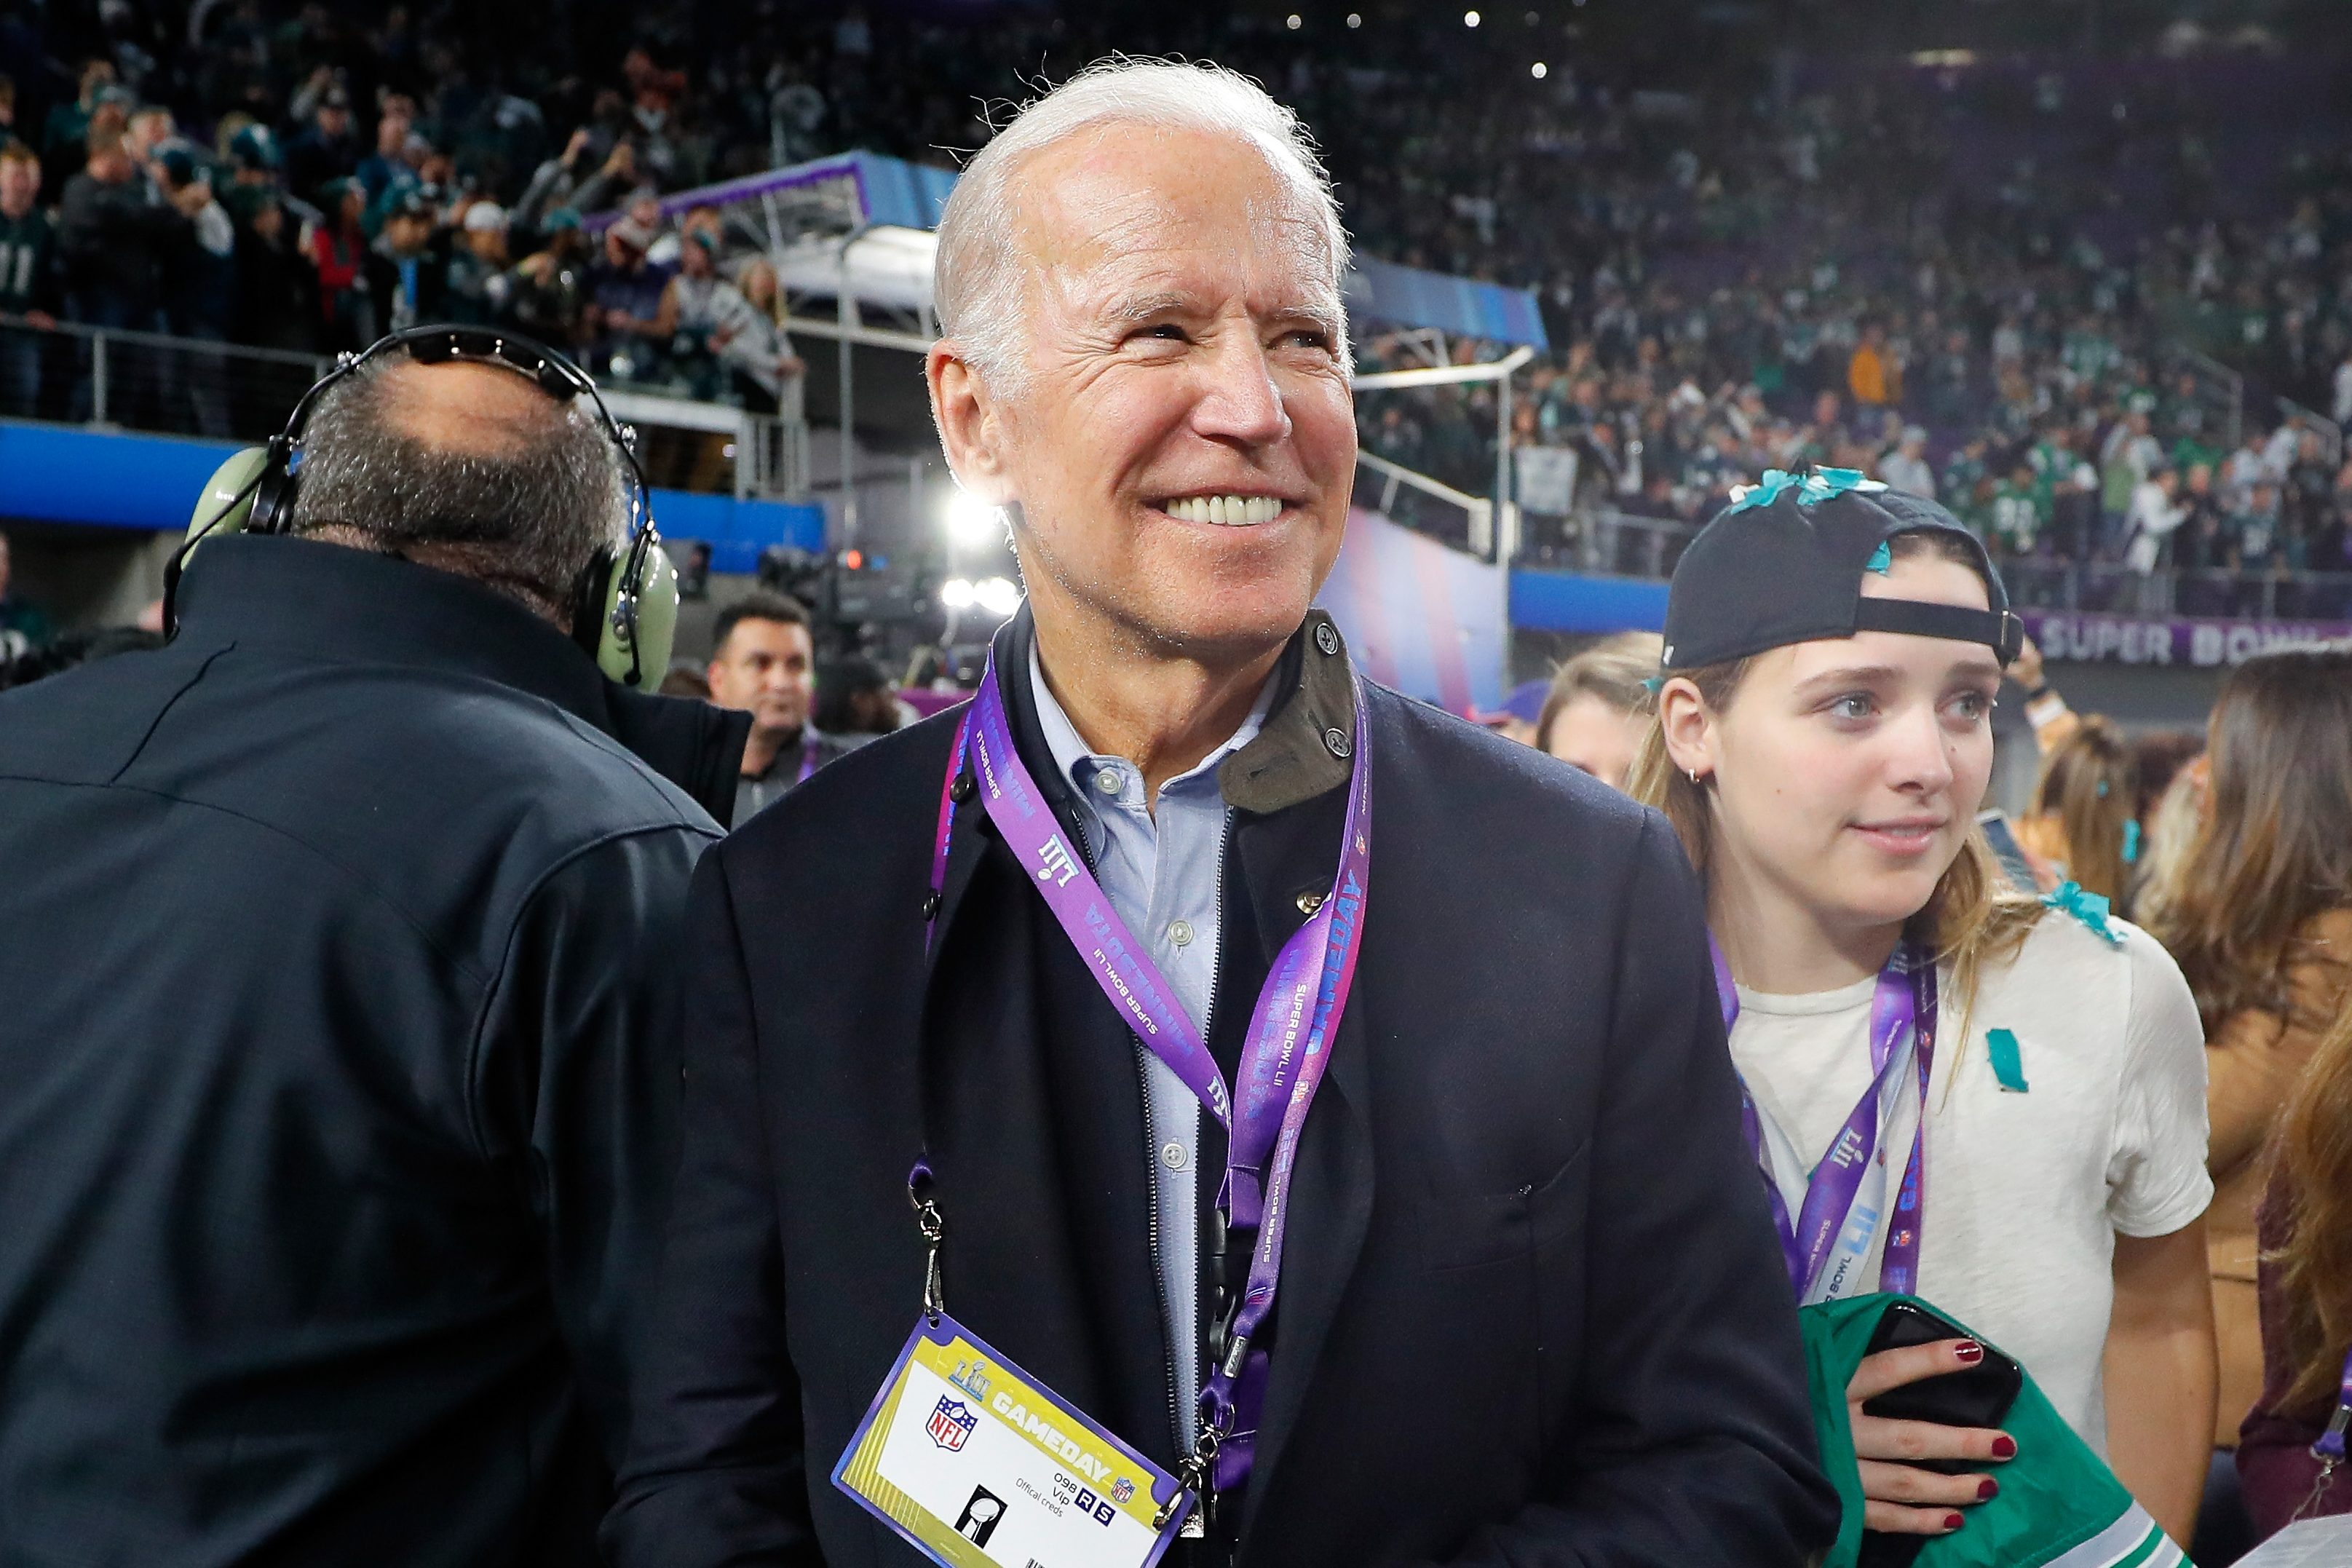 Biden Campaign Spent Big on Sports, Especially the NFL